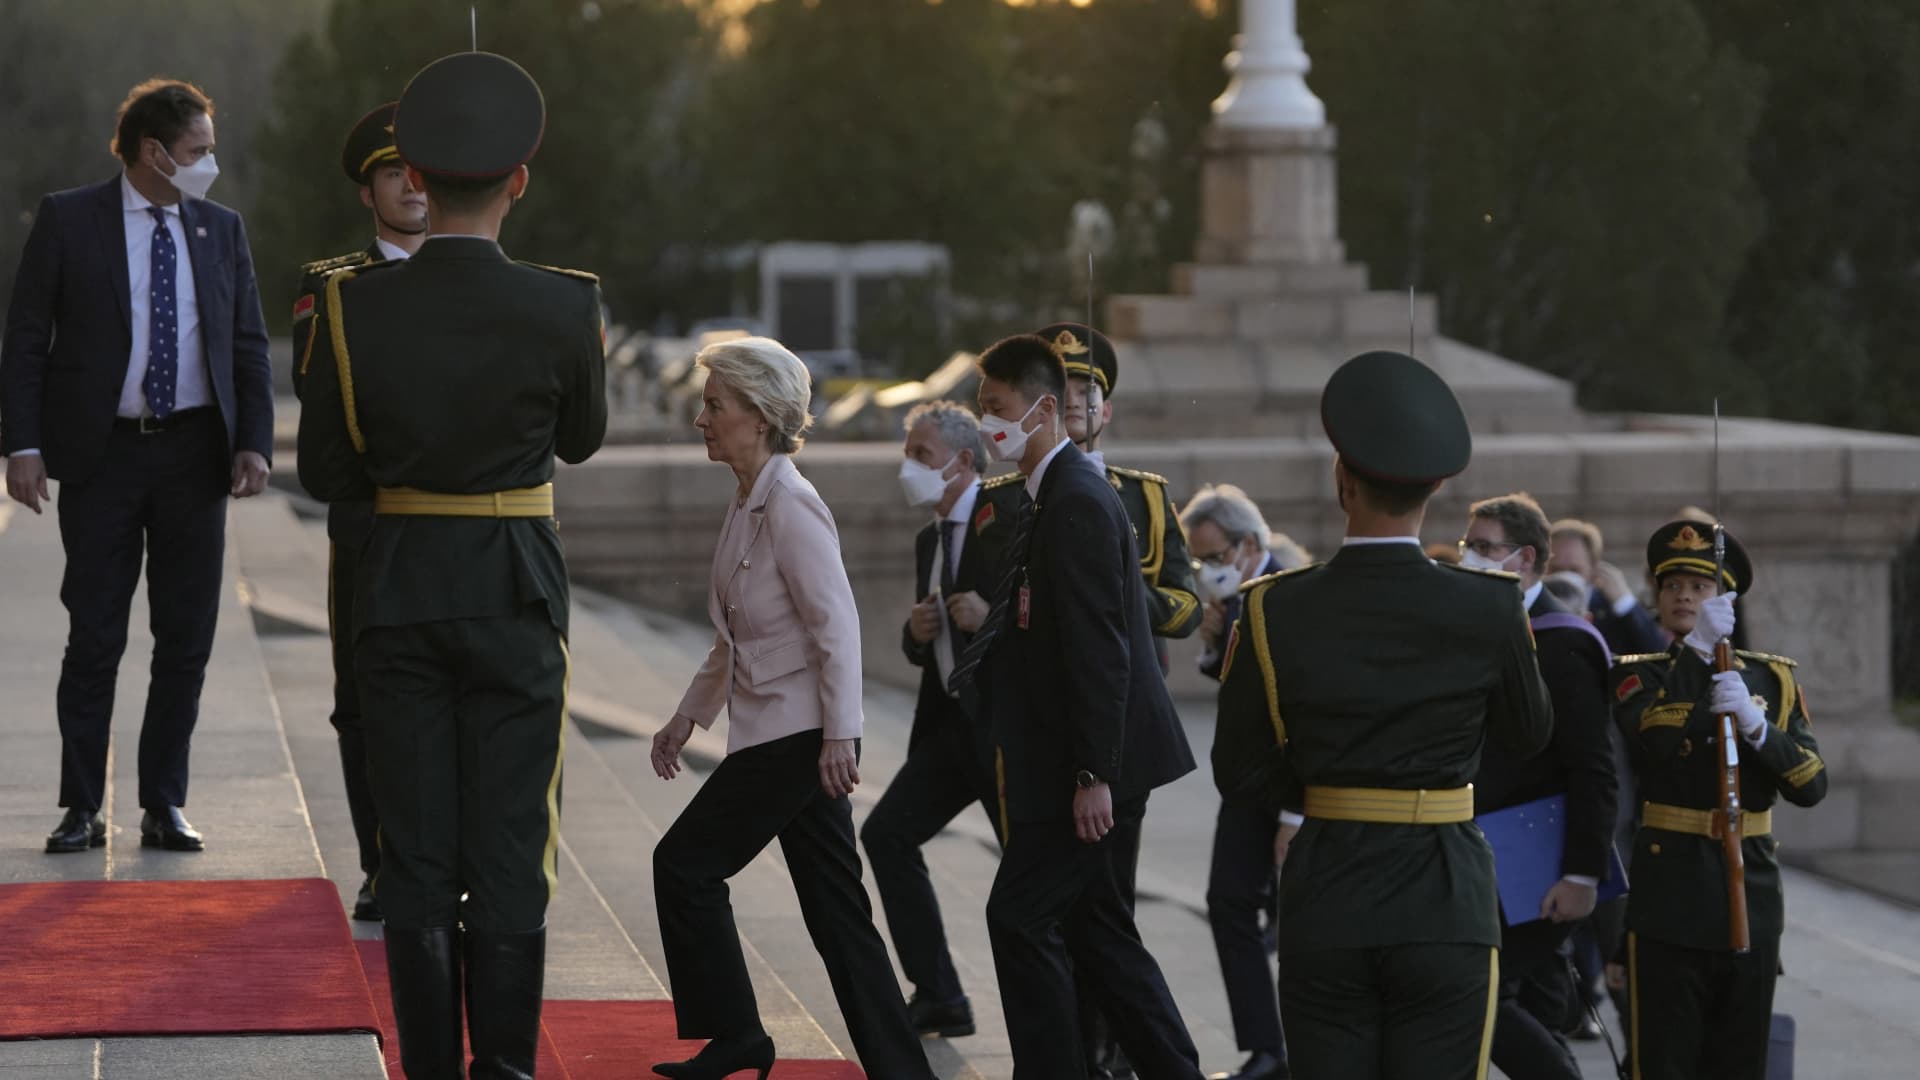 European Commission President Ursula von der Leyen (C) arrives for a meeting with Chinese President Xi Jinping and France's President Emmanuel Macron at the Great Hall of the People in Beijing on April 6, 2023.